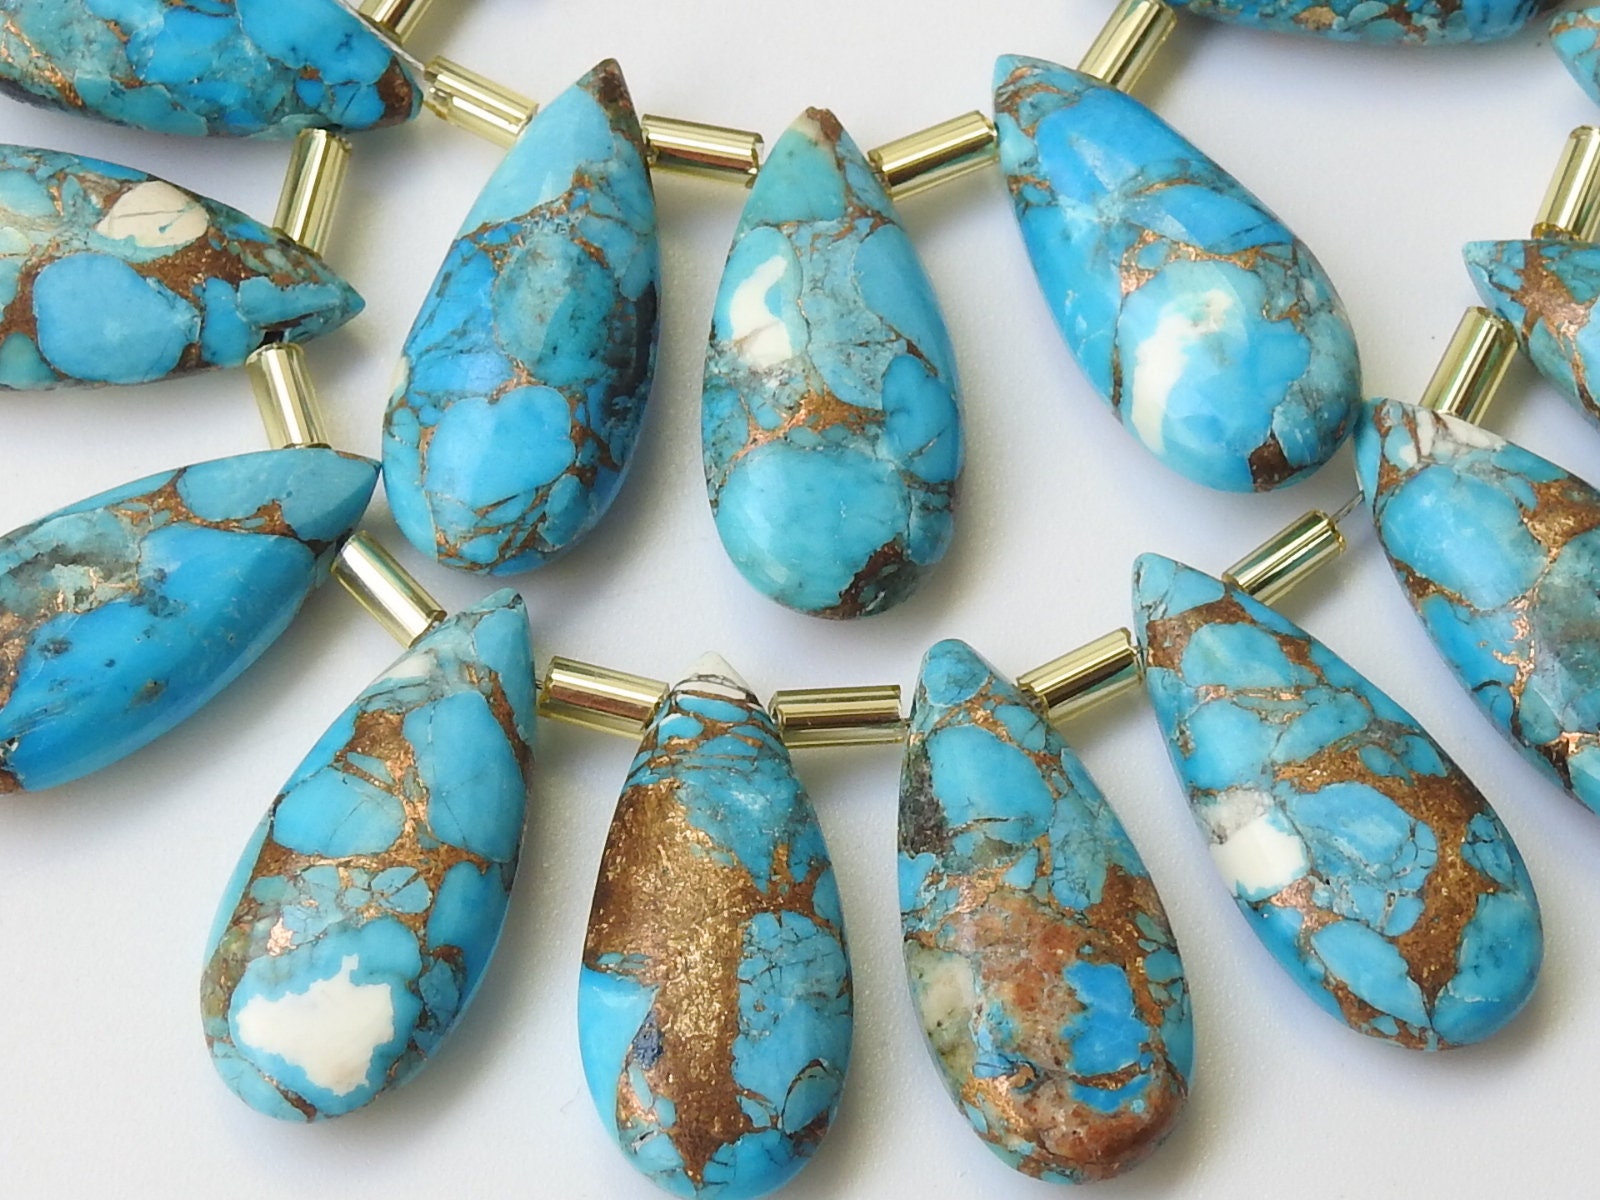 Blue Copper Turquoise Smooth Teardrop,Drop,Handmade,Earrings Pair,For Making Jewelry,Wholesale Price,New Arrival,20X10MM Approx PME-CY3 | Save 33% - Rajasthan Living 16